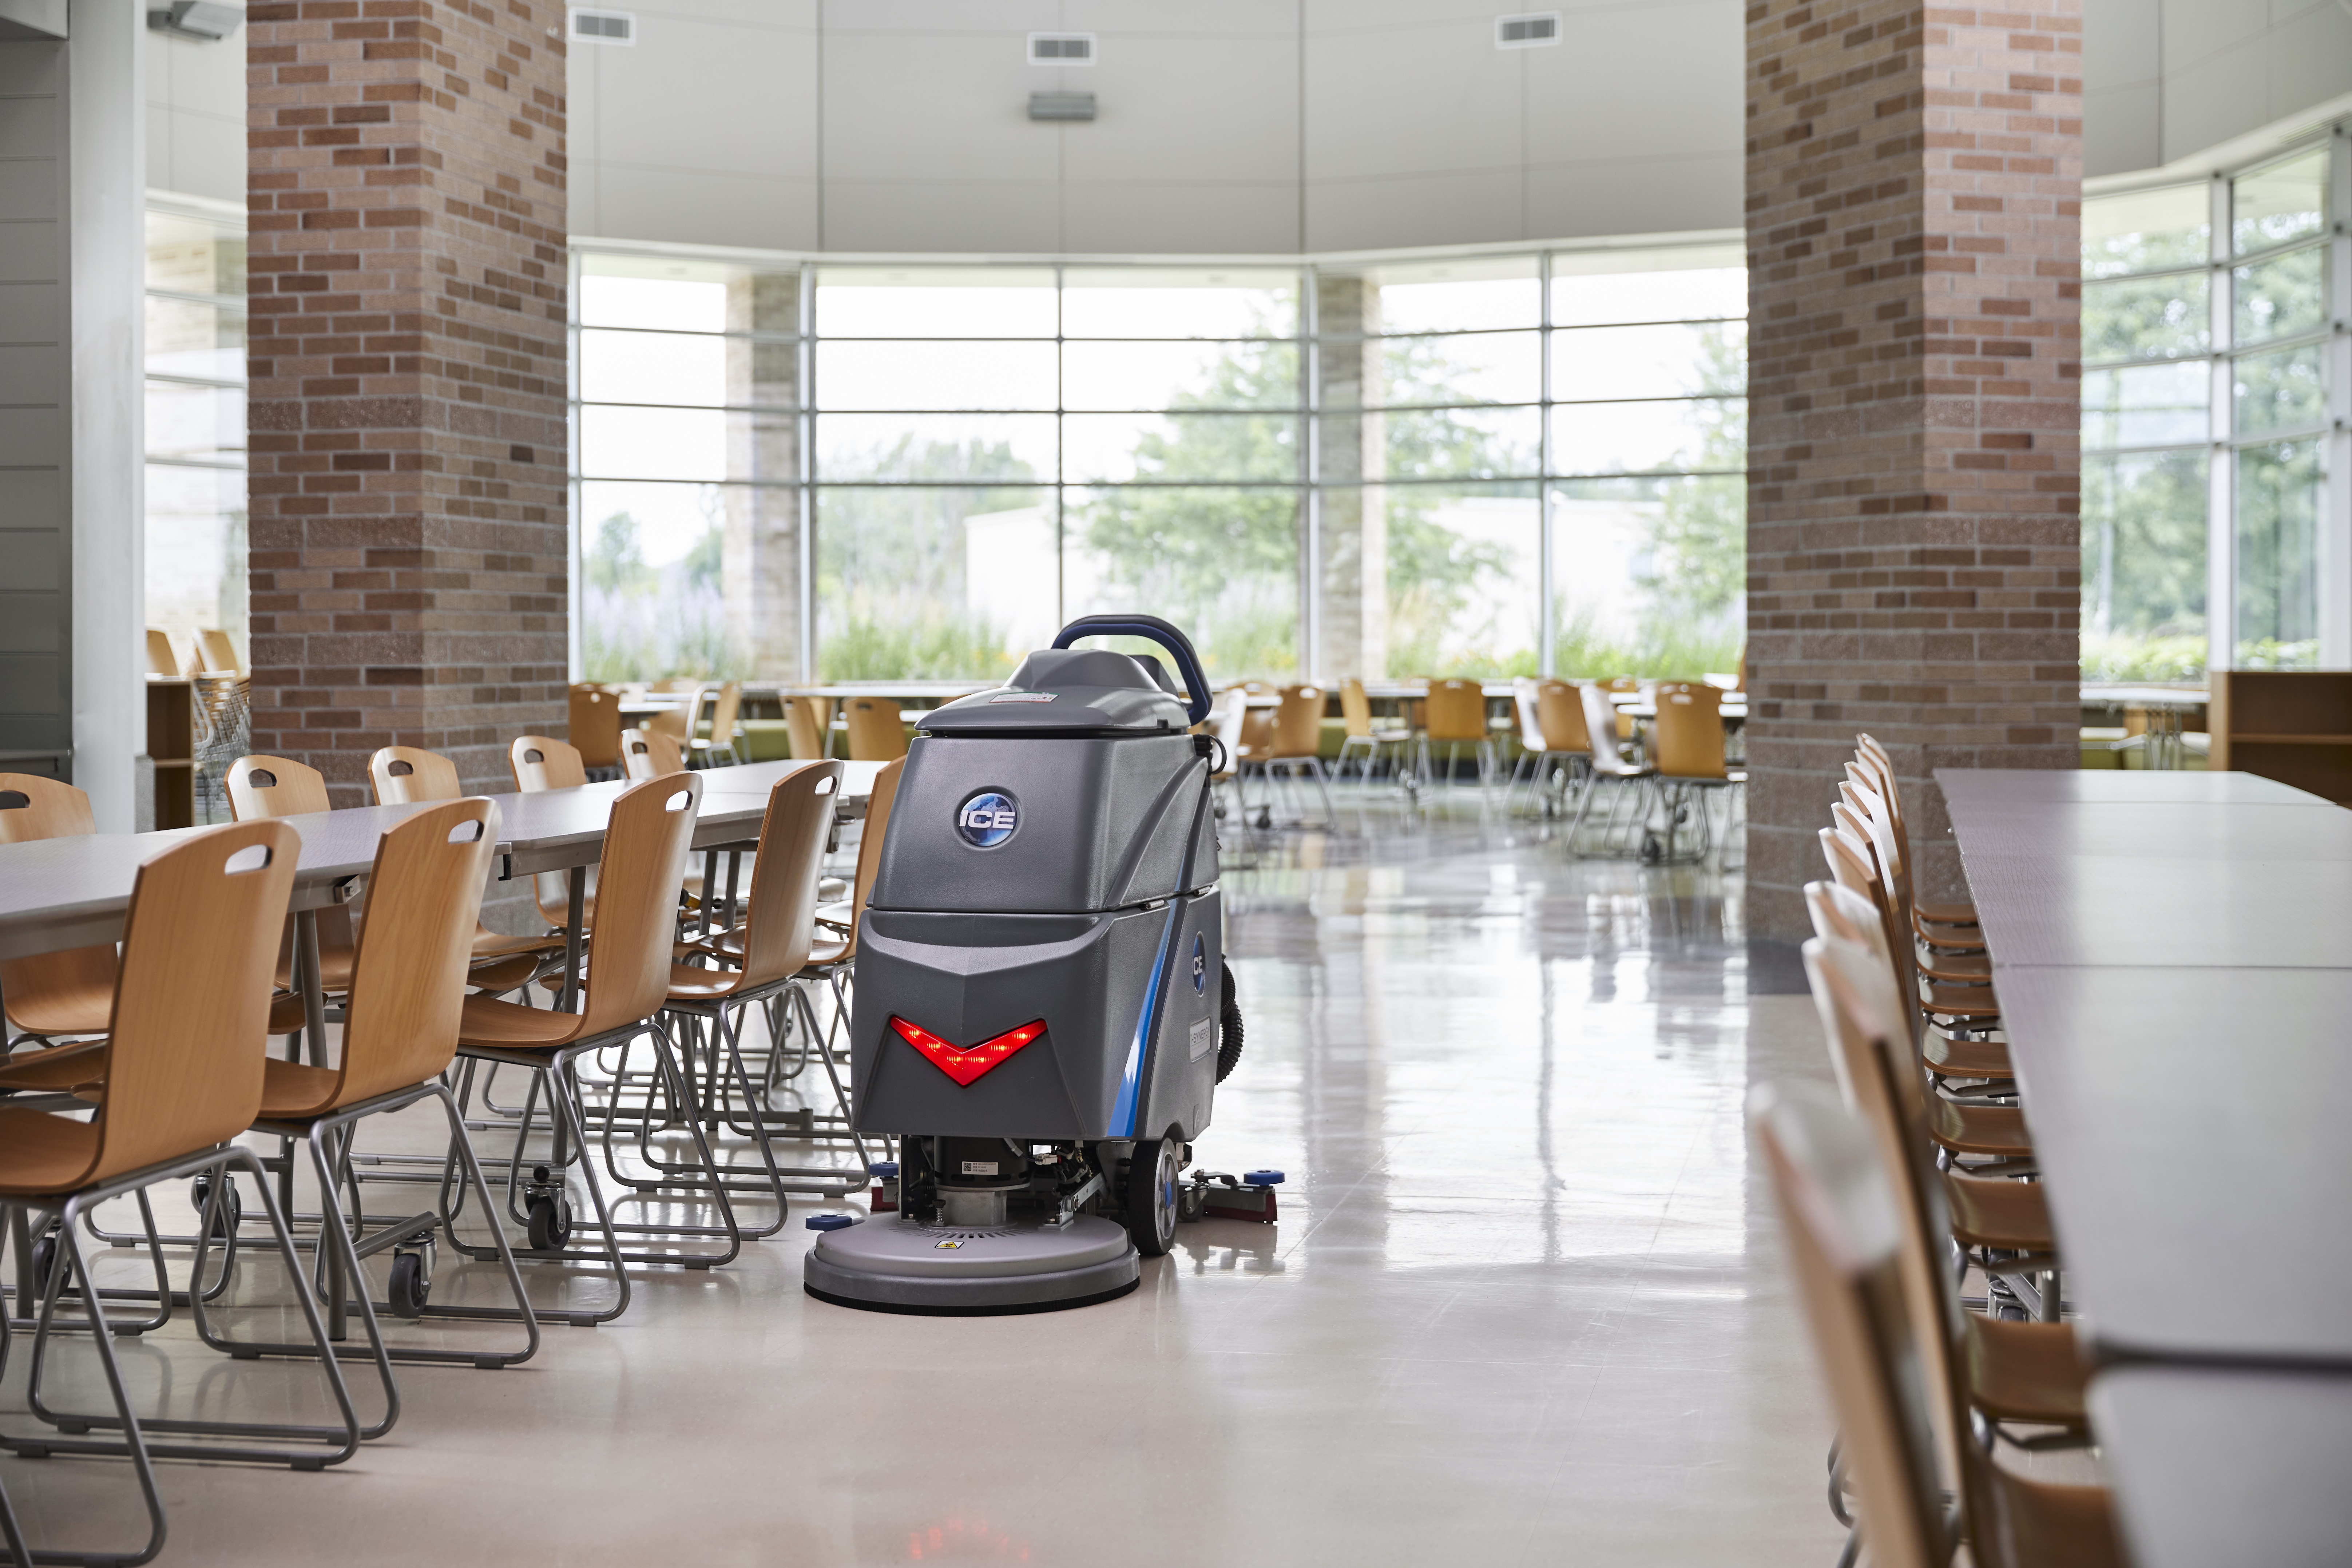 walk-behind floor scrubber placed inside a very clean school cafeteria